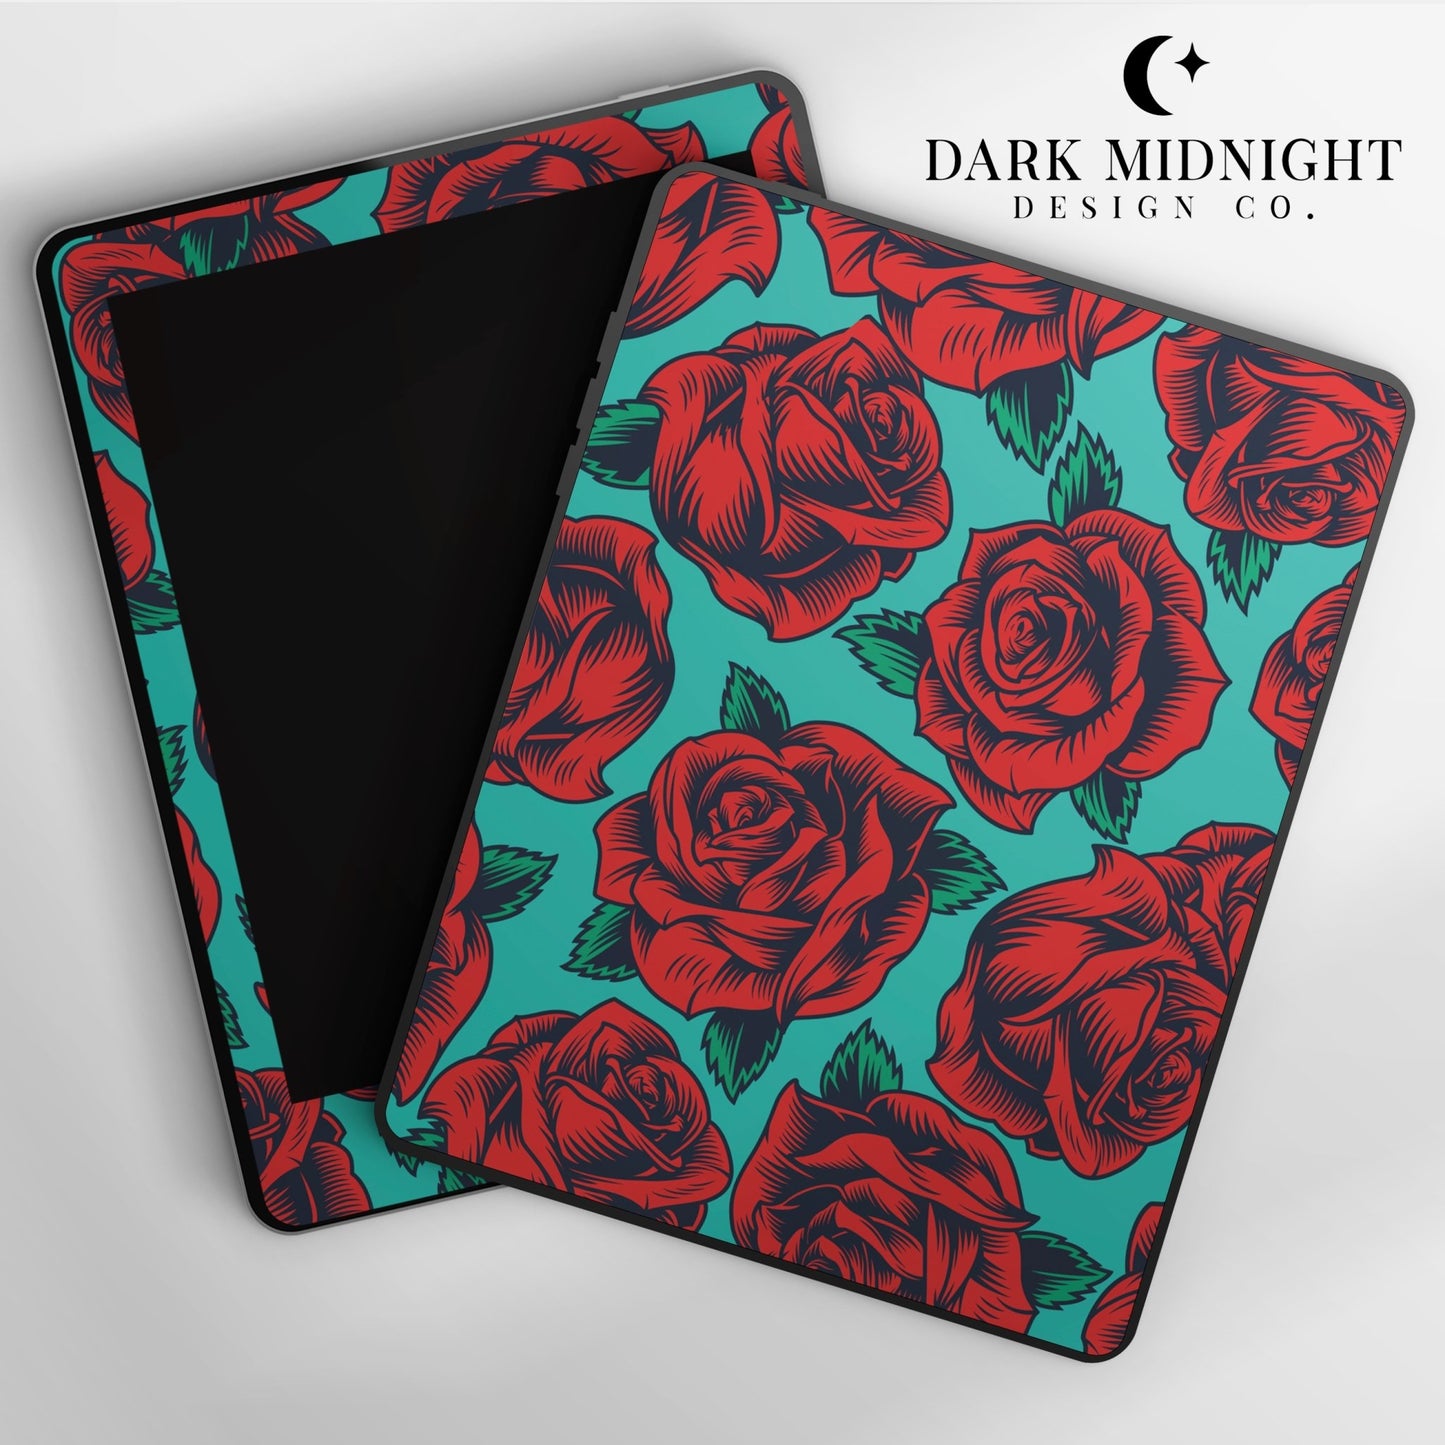 Vintage Rose Teal and Red Kindle Paperwhite Vinyl Wrap - Dark Midnight Design Co